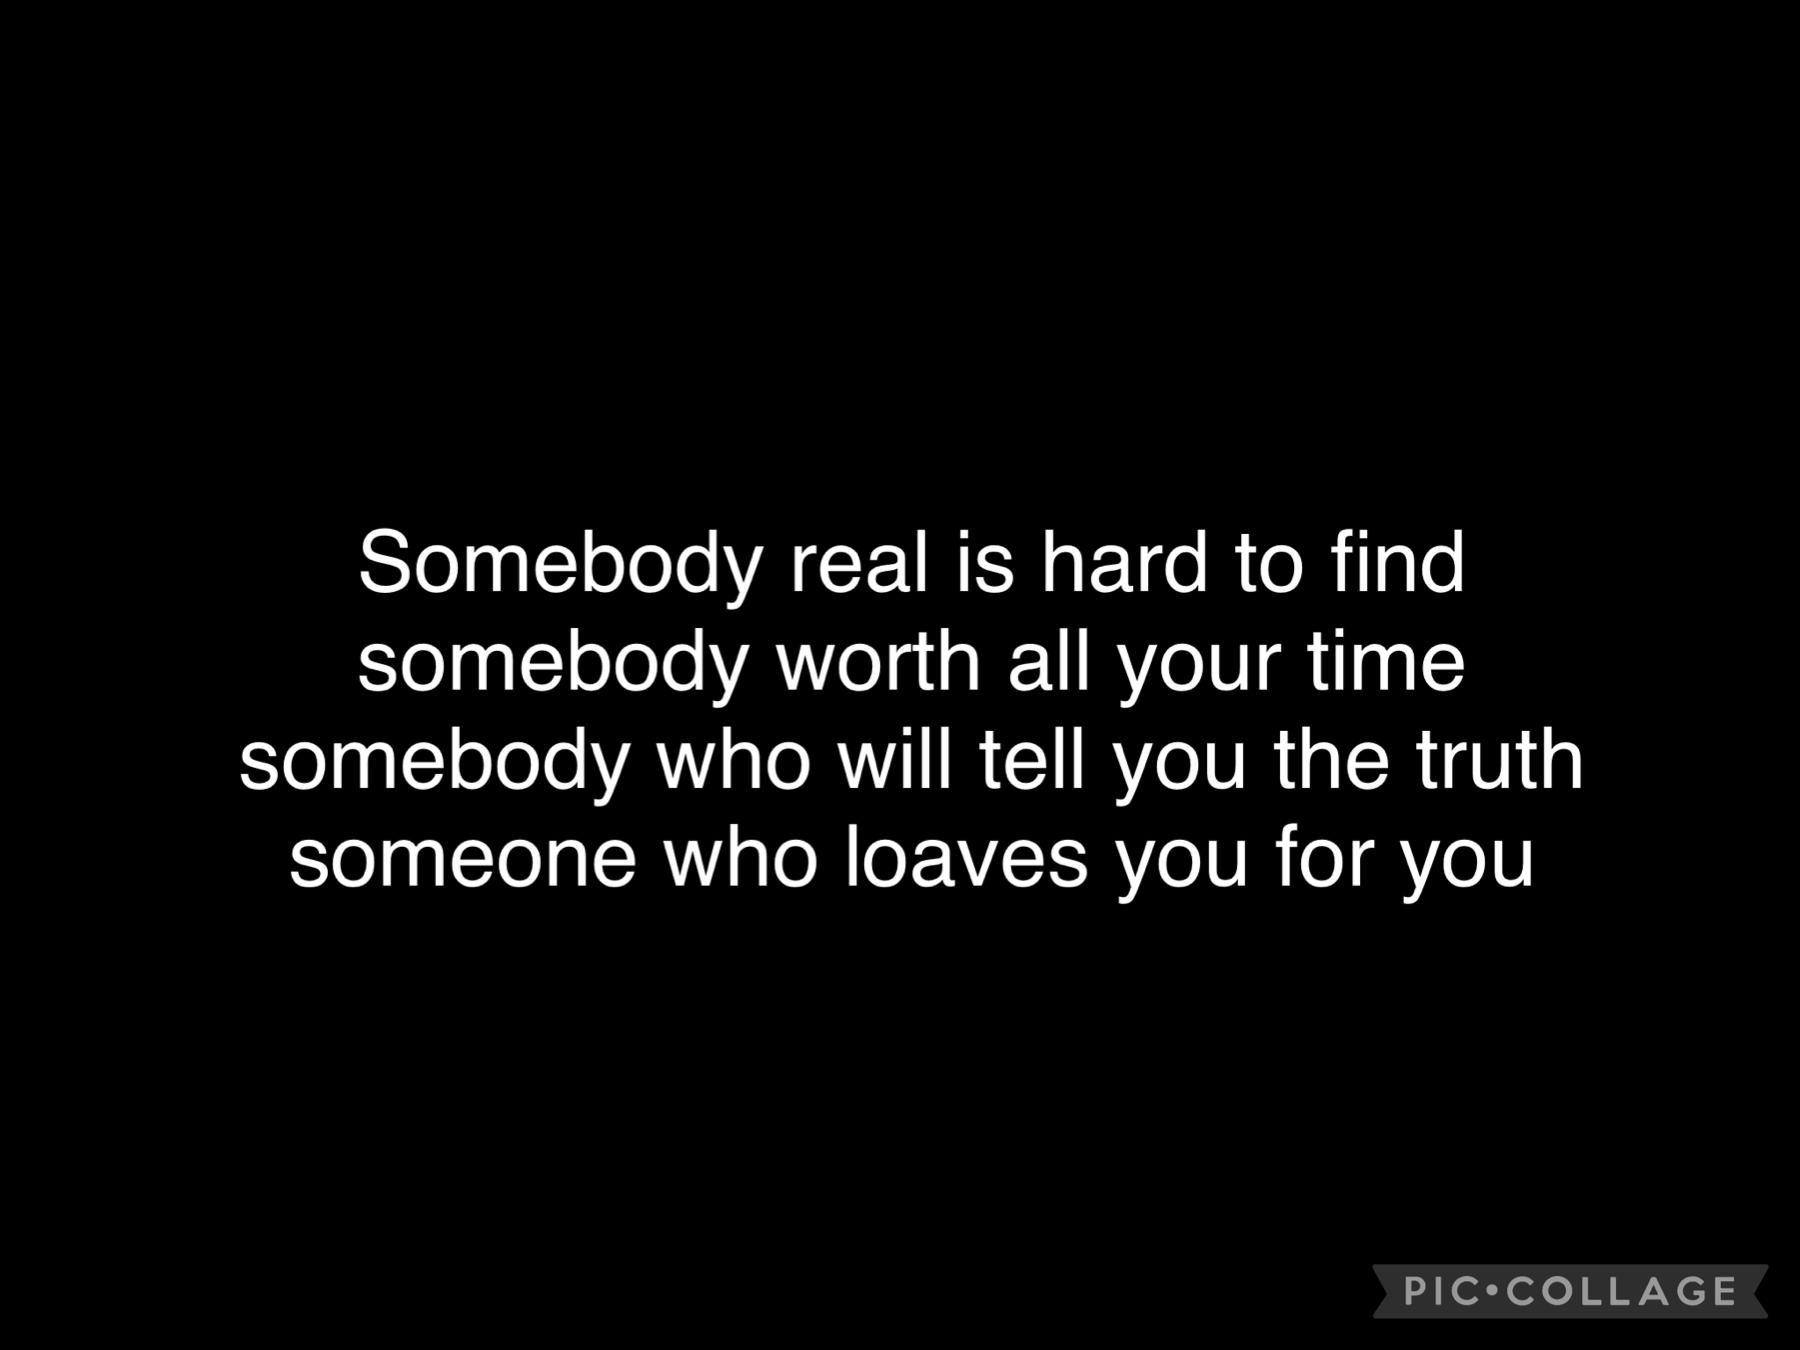 Somebody real is hard to find 💔